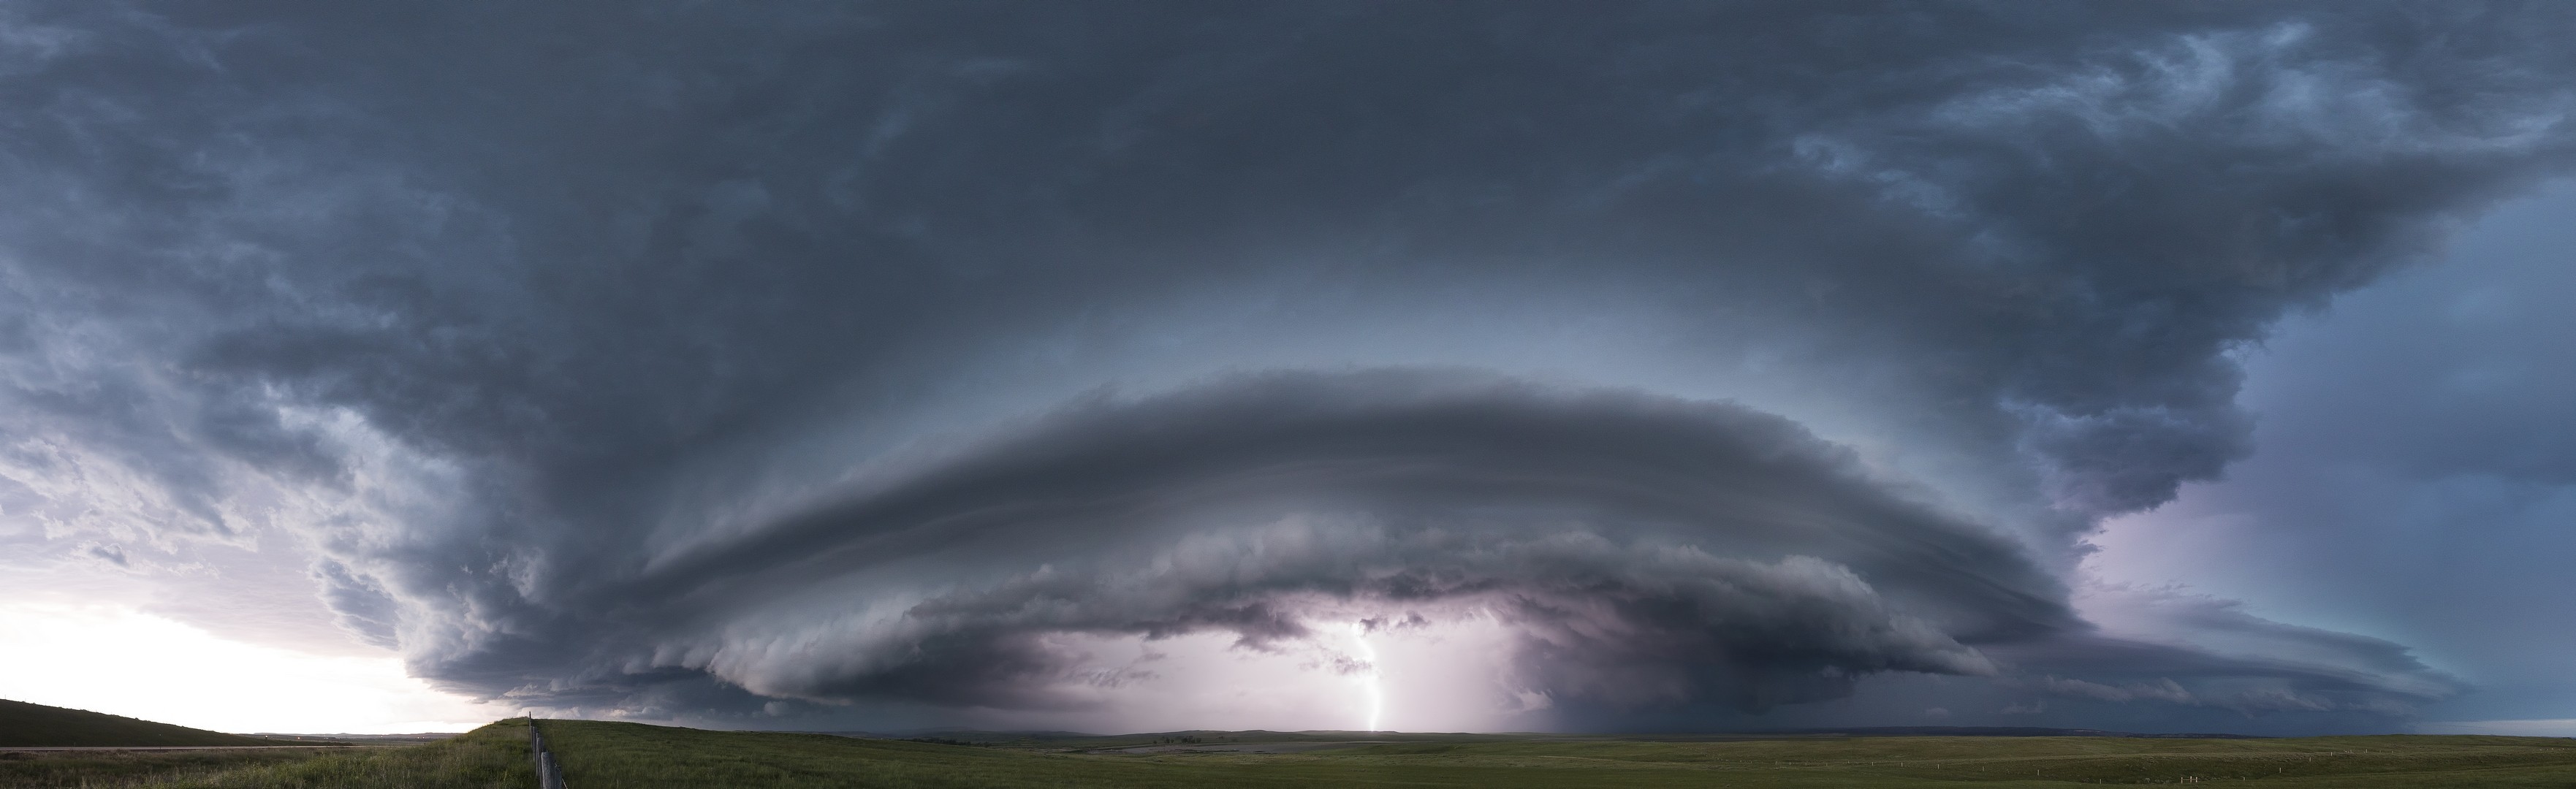 Lightning Storm Skyscape Clouds Supercell Nature 3525x1080